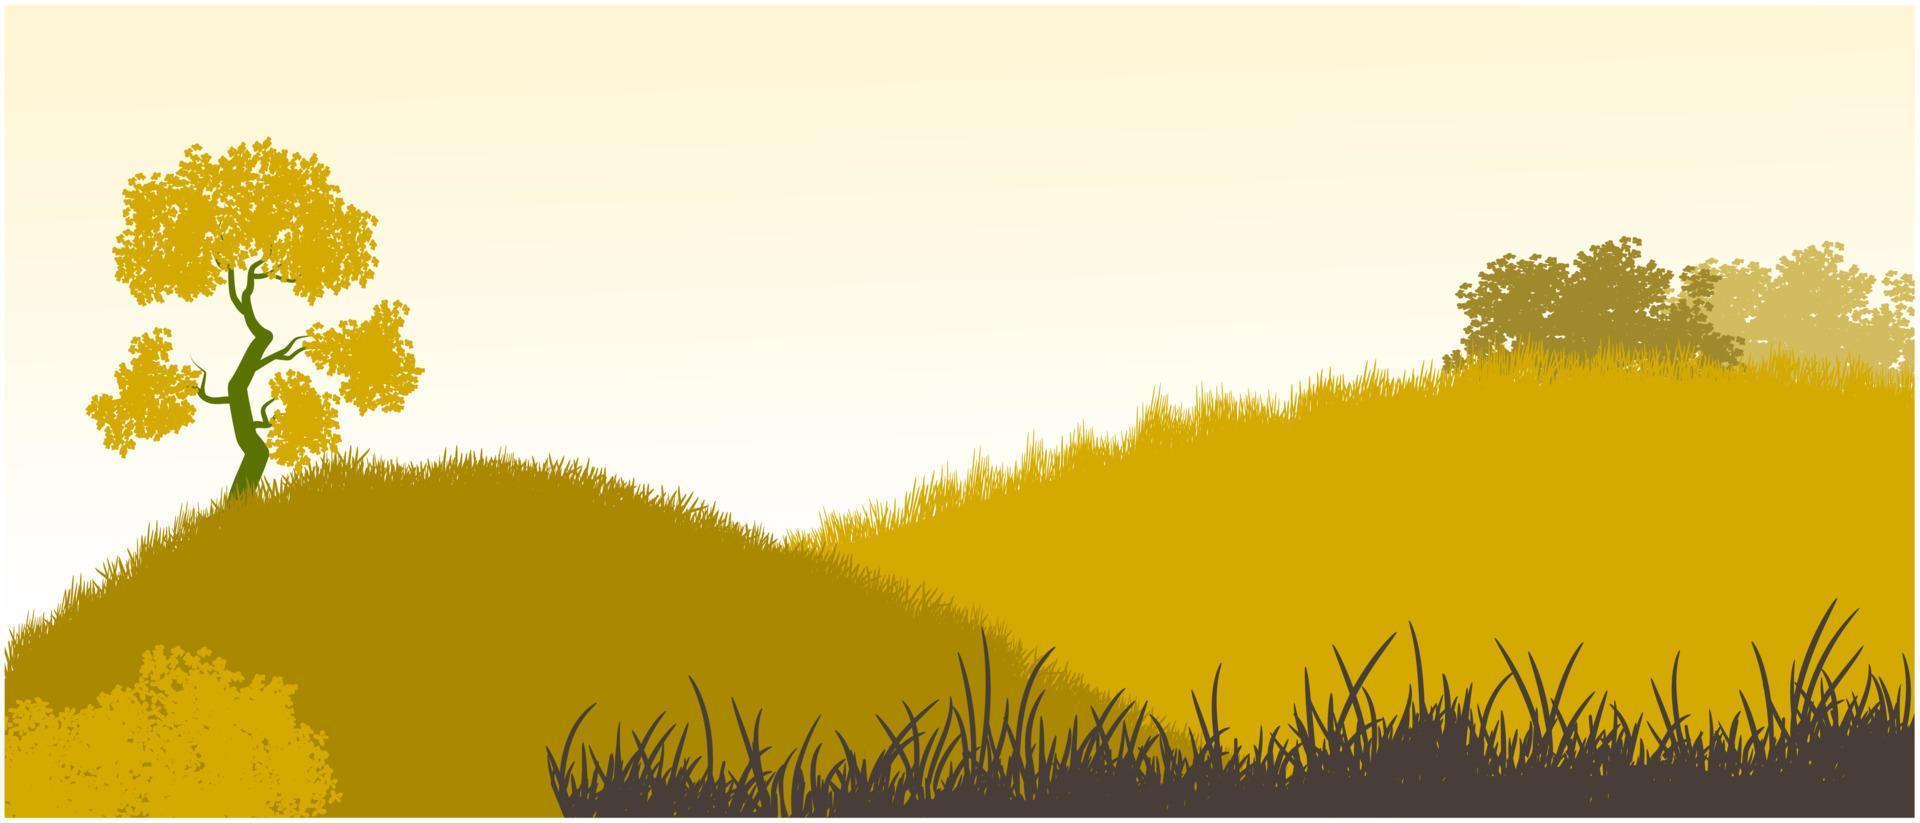 dry brown hills silhouette, dead grass background vector